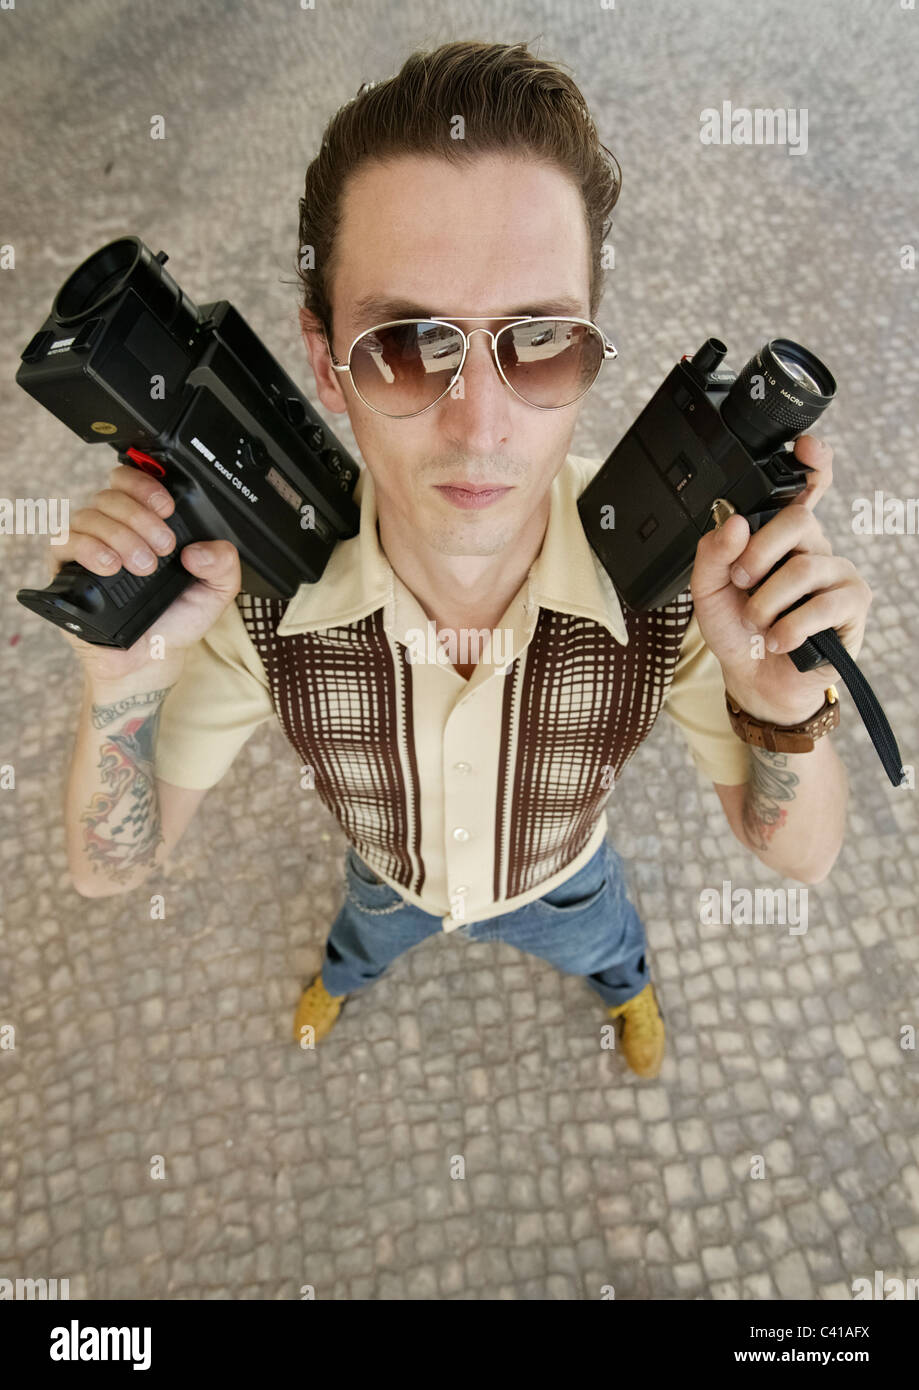 High angle portrait of man holding old super-8 film cameras Stock Photo